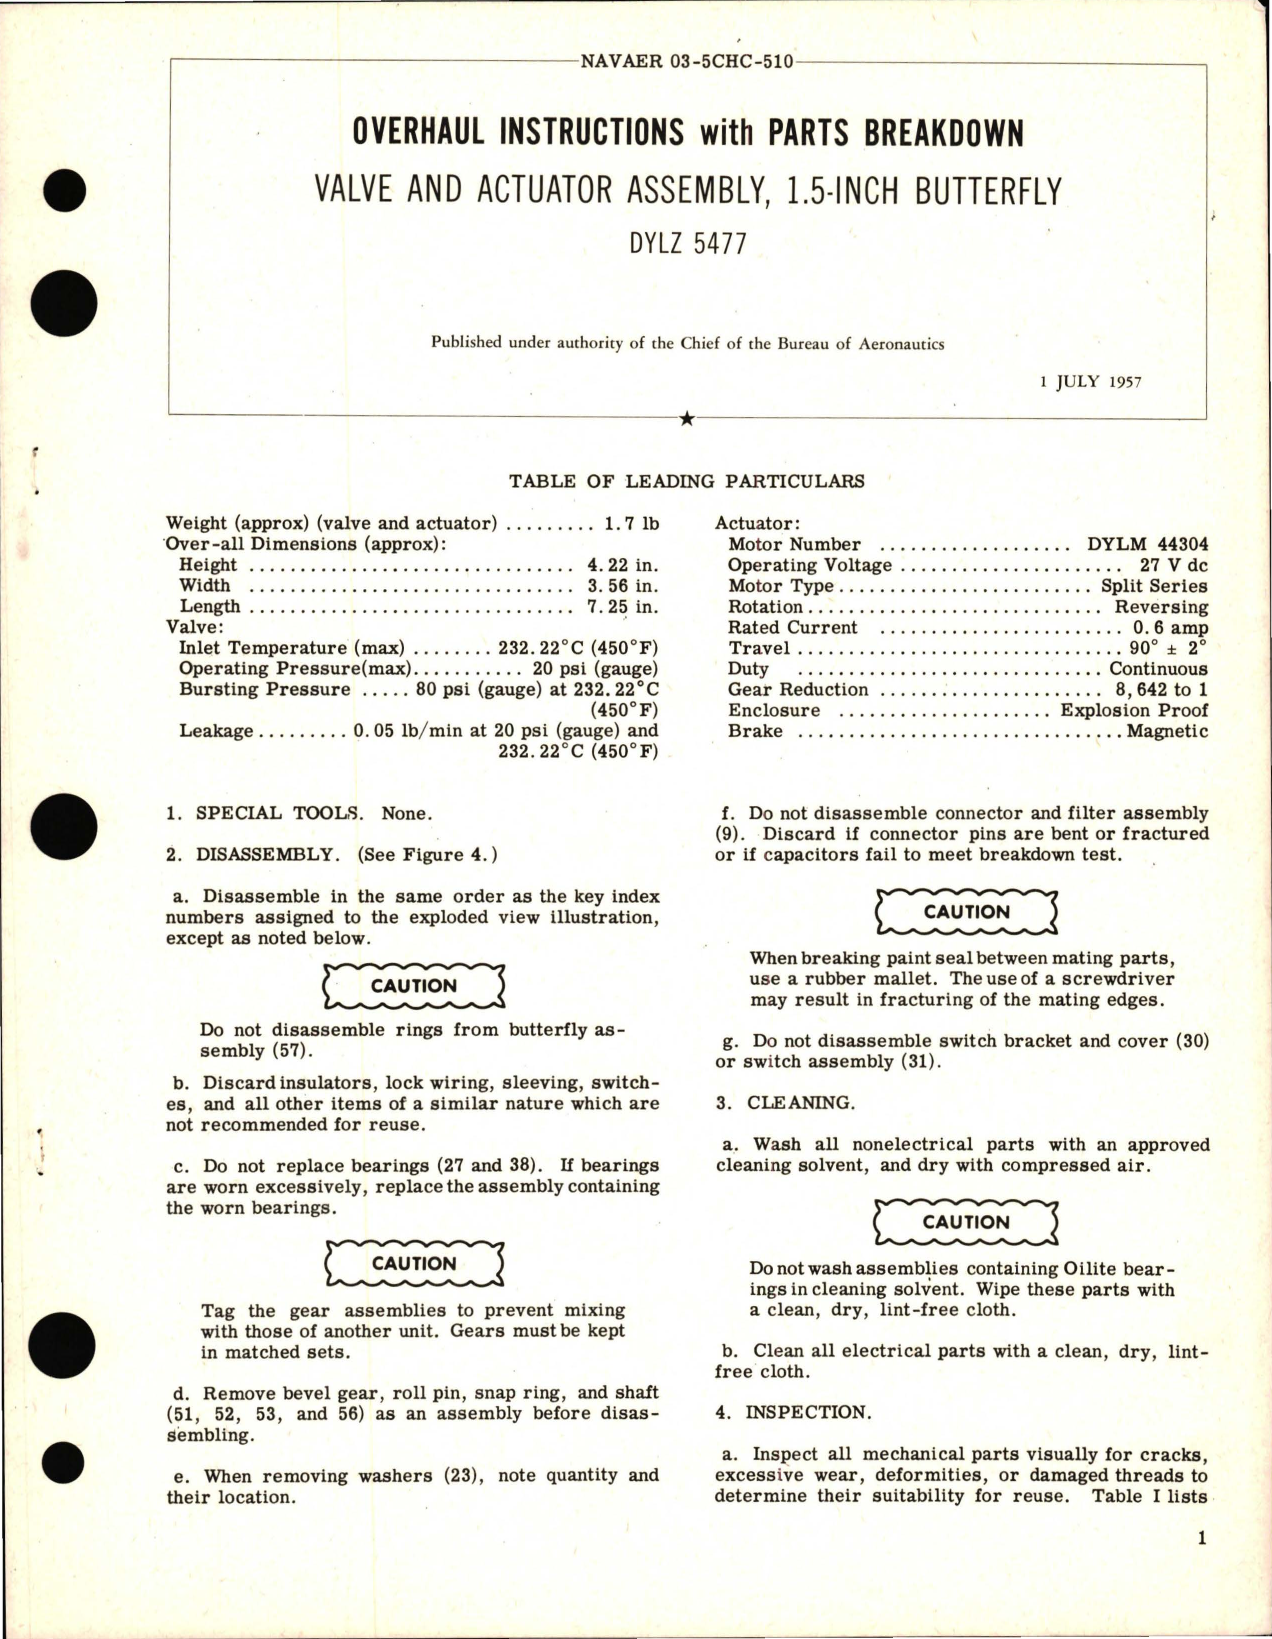 Sample page 1 from AirCorps Library document: Overhaul Instructions with Parts Breakdown for Valve and Actuator Assembly, 1.5 Inch Butterfly - DYLZ 5477